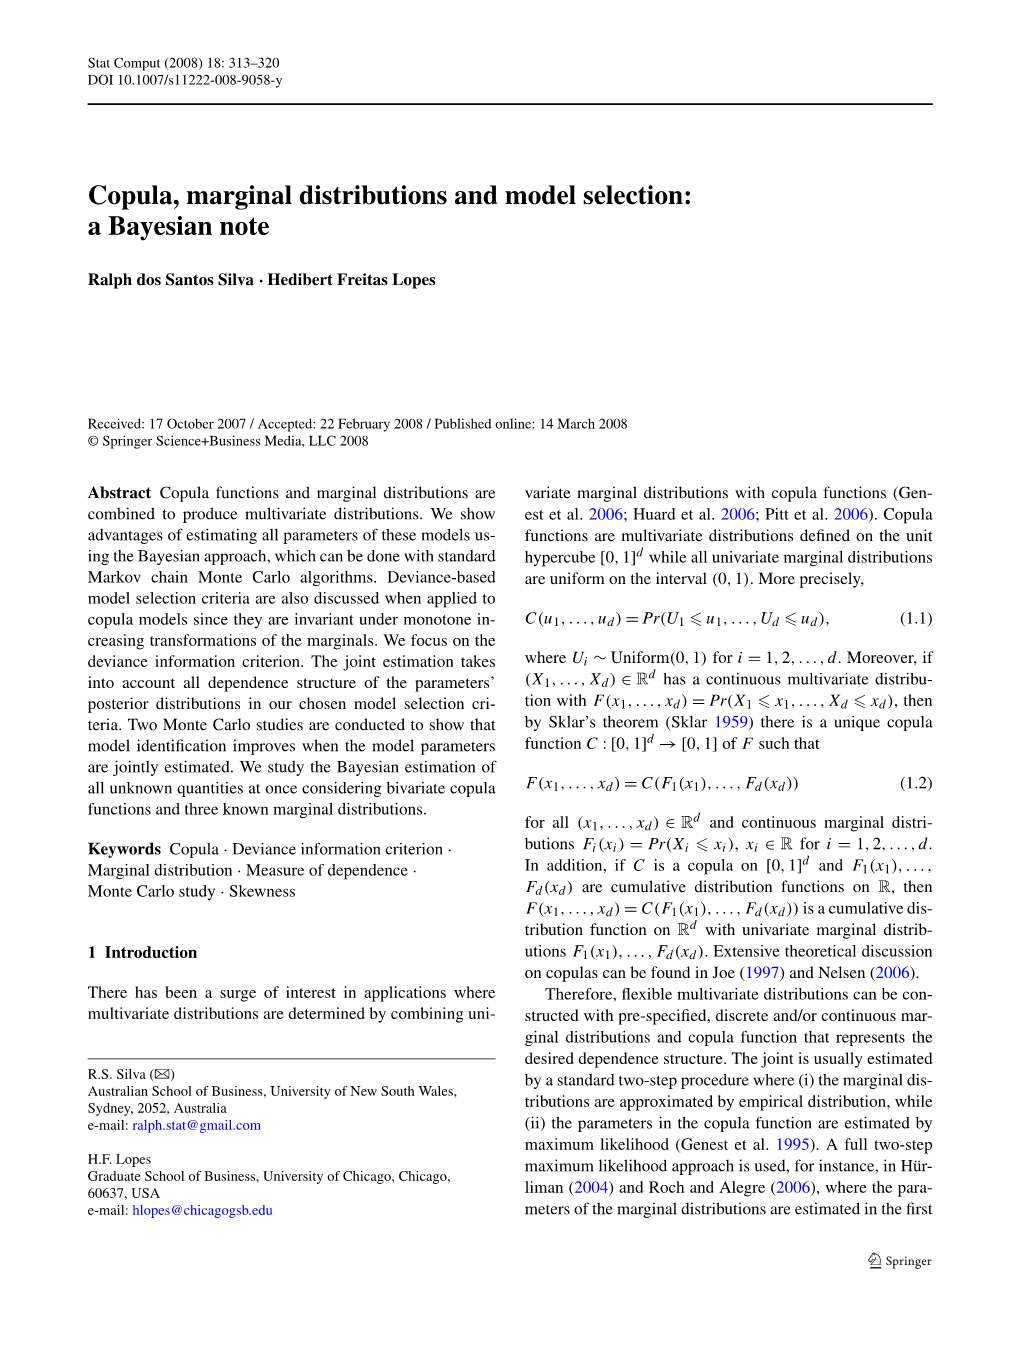 Copula, Marginal Distributions and Model Selection: a Bayesian Note